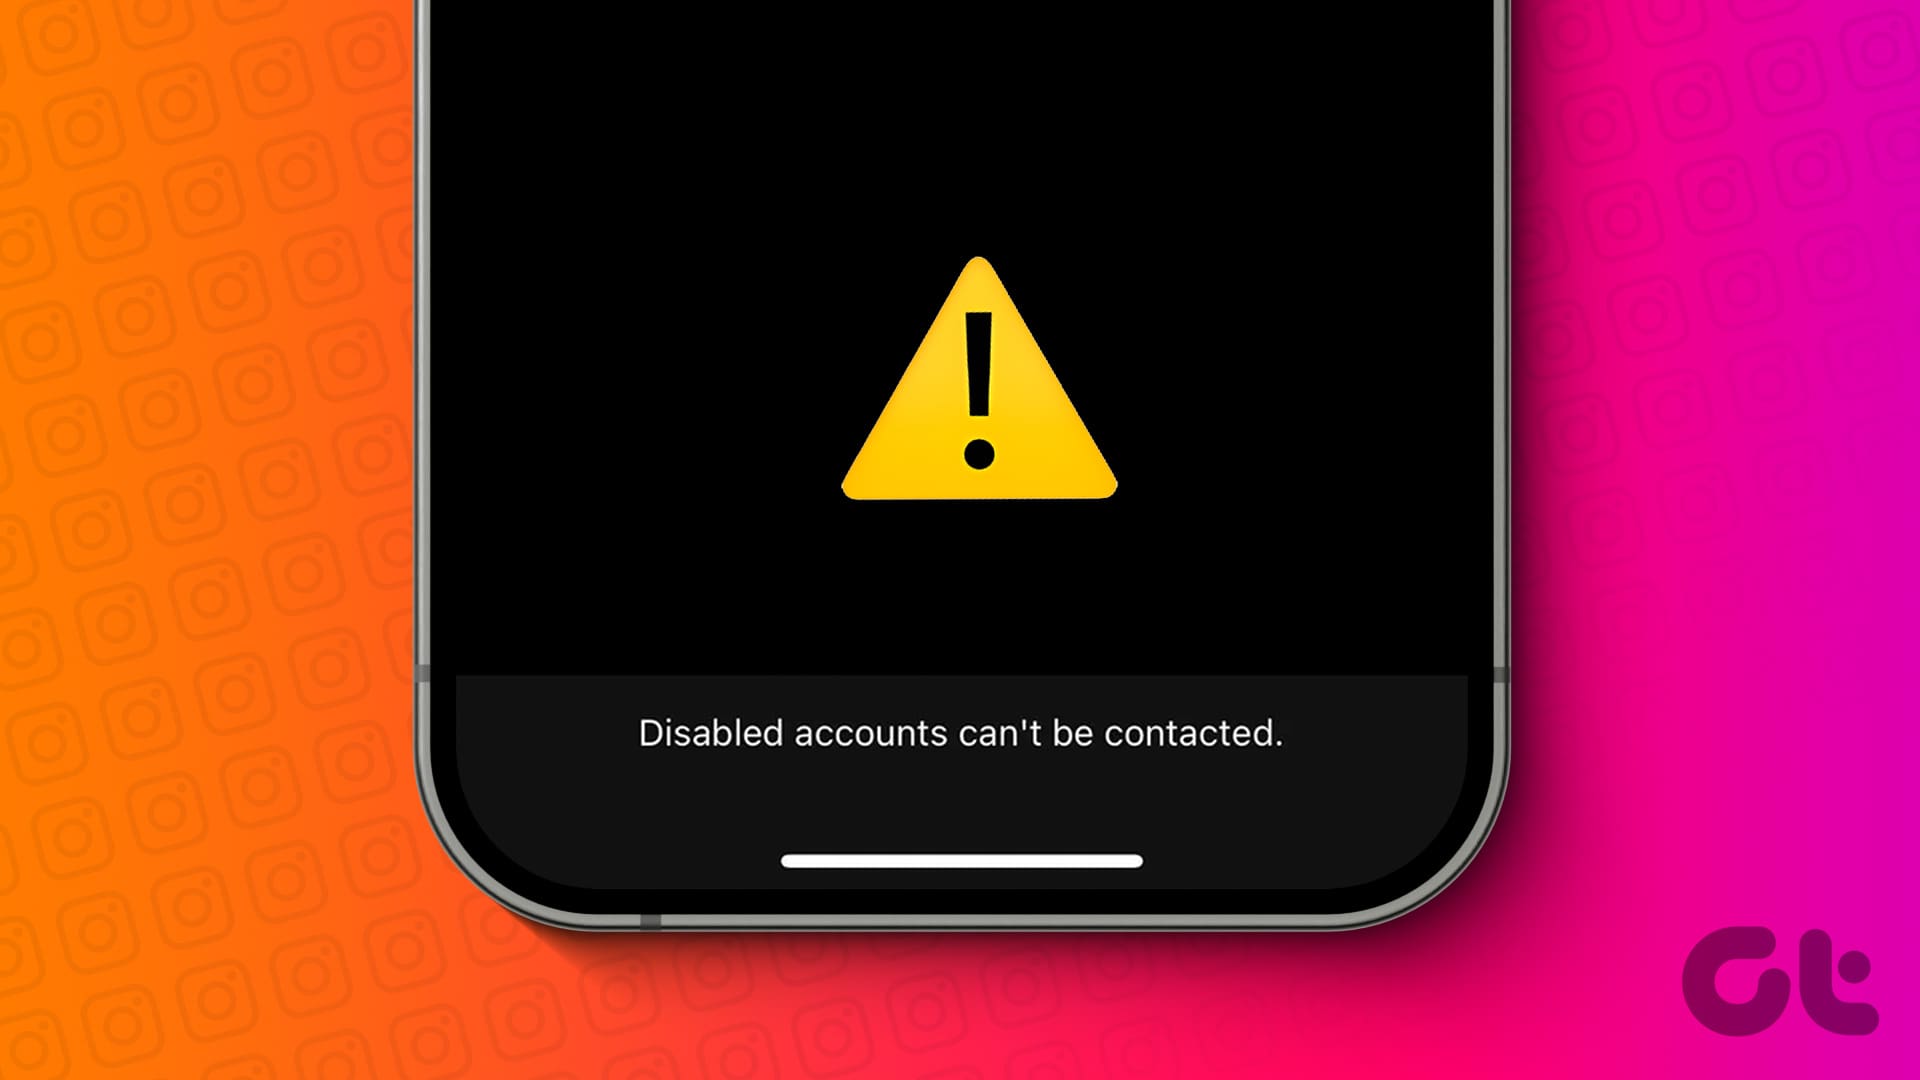 How to Fix the Disabled Accounts Cant Be Contacted Error on Instagram